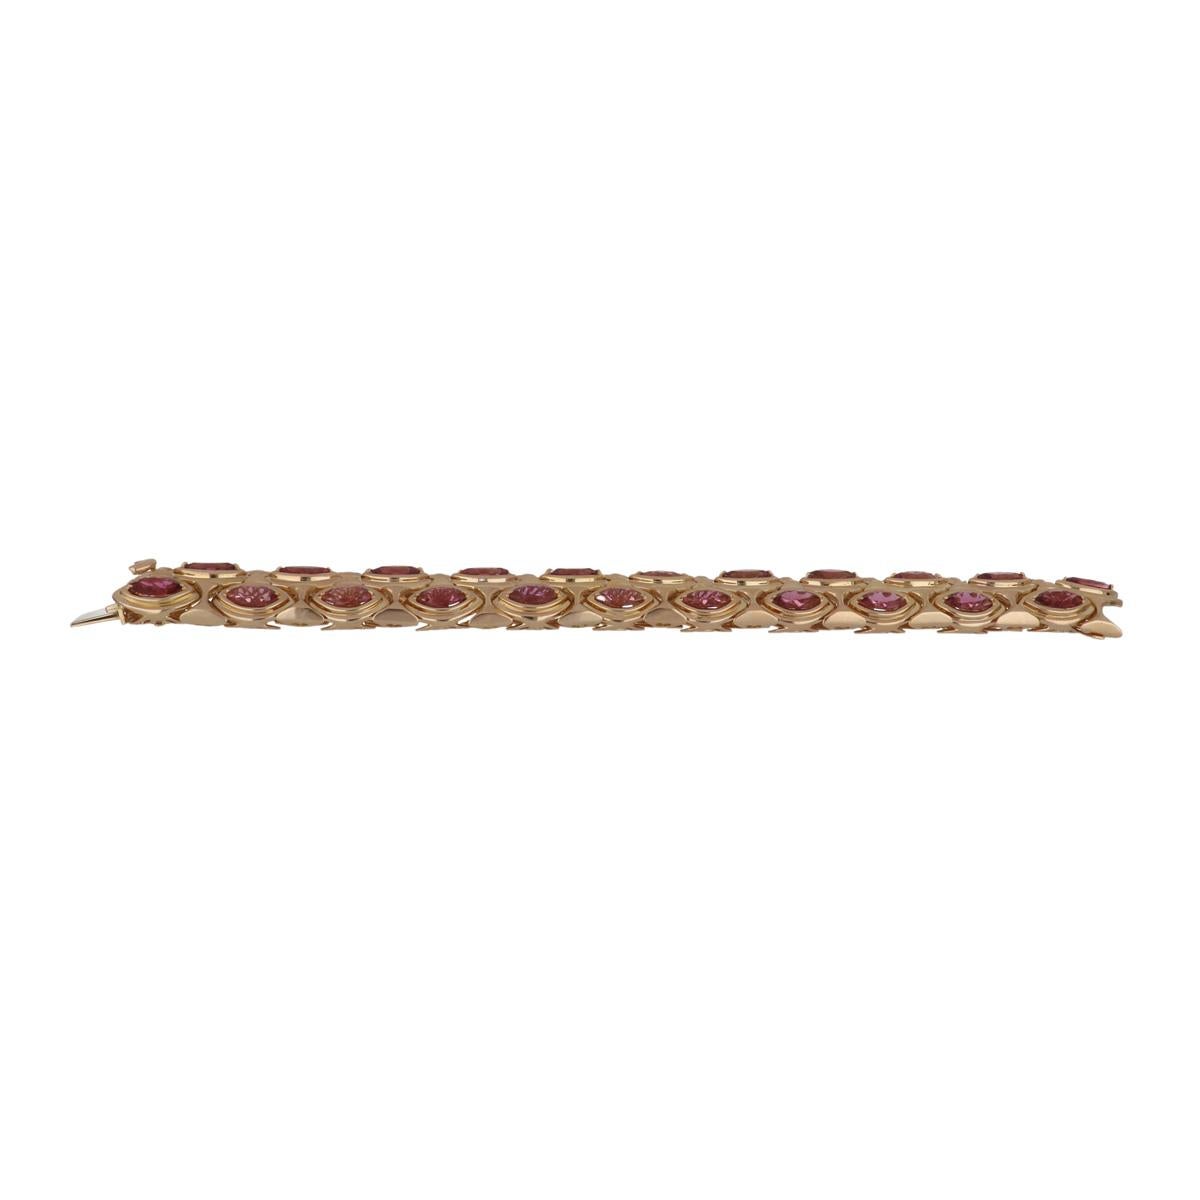 Hammerman Bros. geometric link bracelet composed of 18K yellow gold featuring pink tourmalines.  There are 33 marquise-shaped tourmaline stones that total 26.50 carats.  The bracelet has a nice fluid movement to it. It measures 7 1/2 inches in